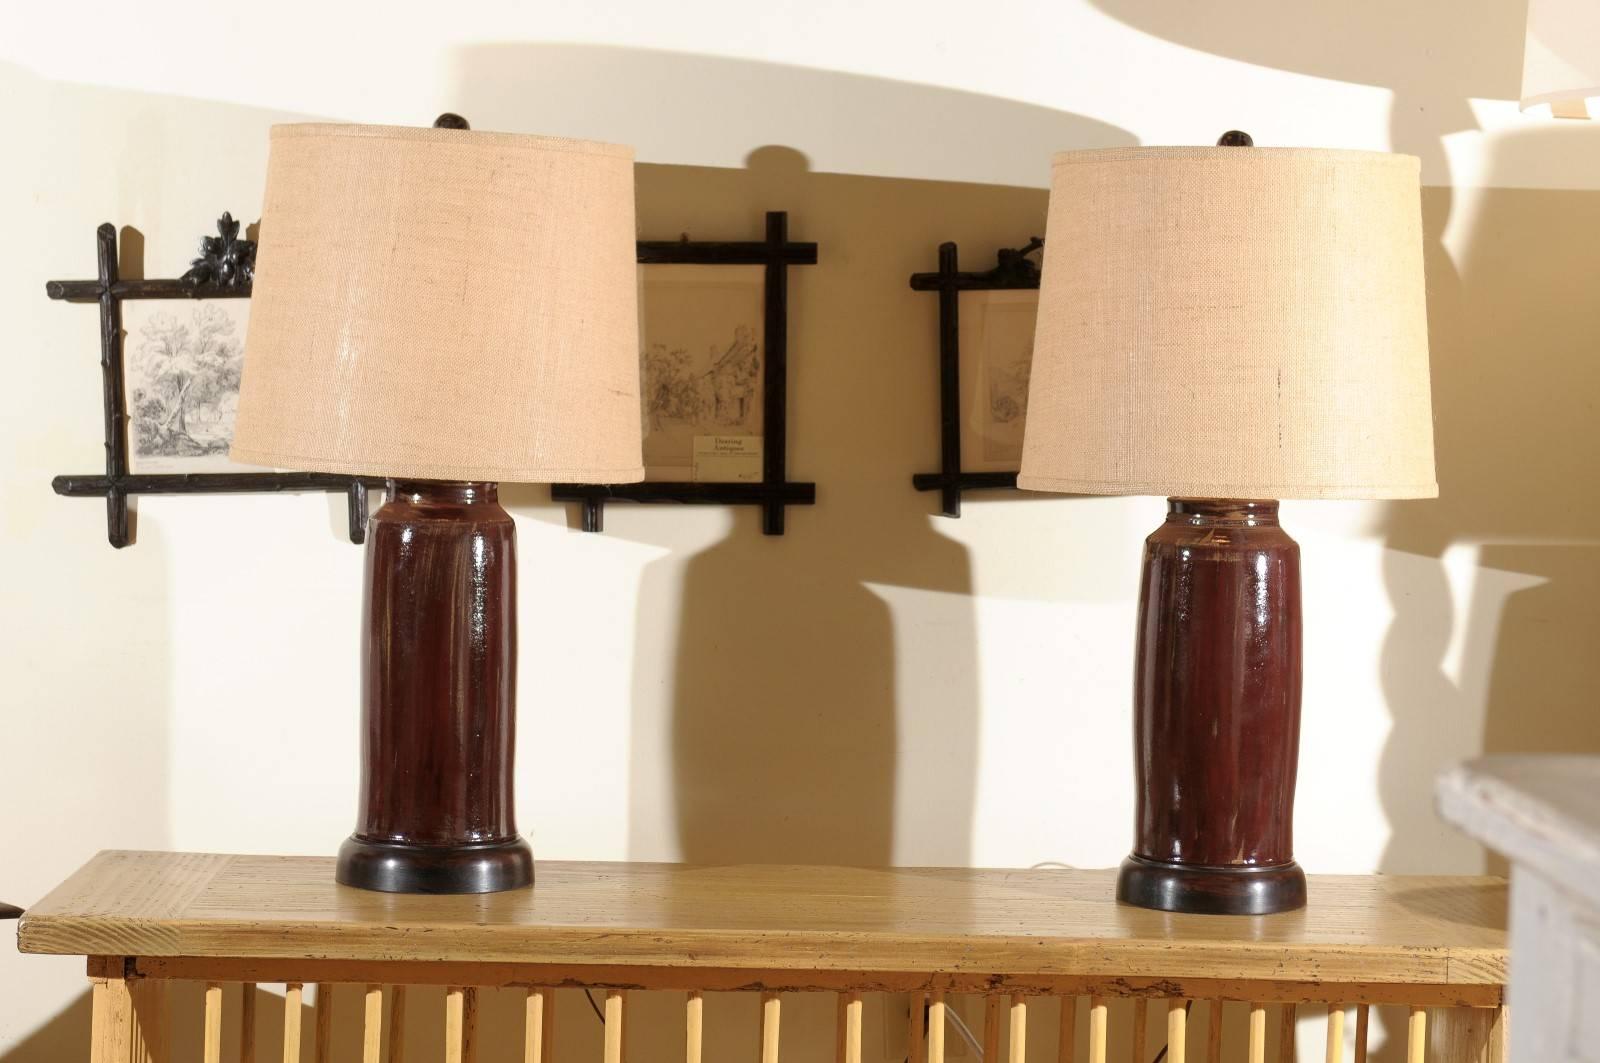 This is a pair of unique hand-turned lamps created by Charlie West, a noted North Georgia potter since 1986. They are mounted on a wooden base which is hand-turned on a wood lathe. All of his lamps are original.